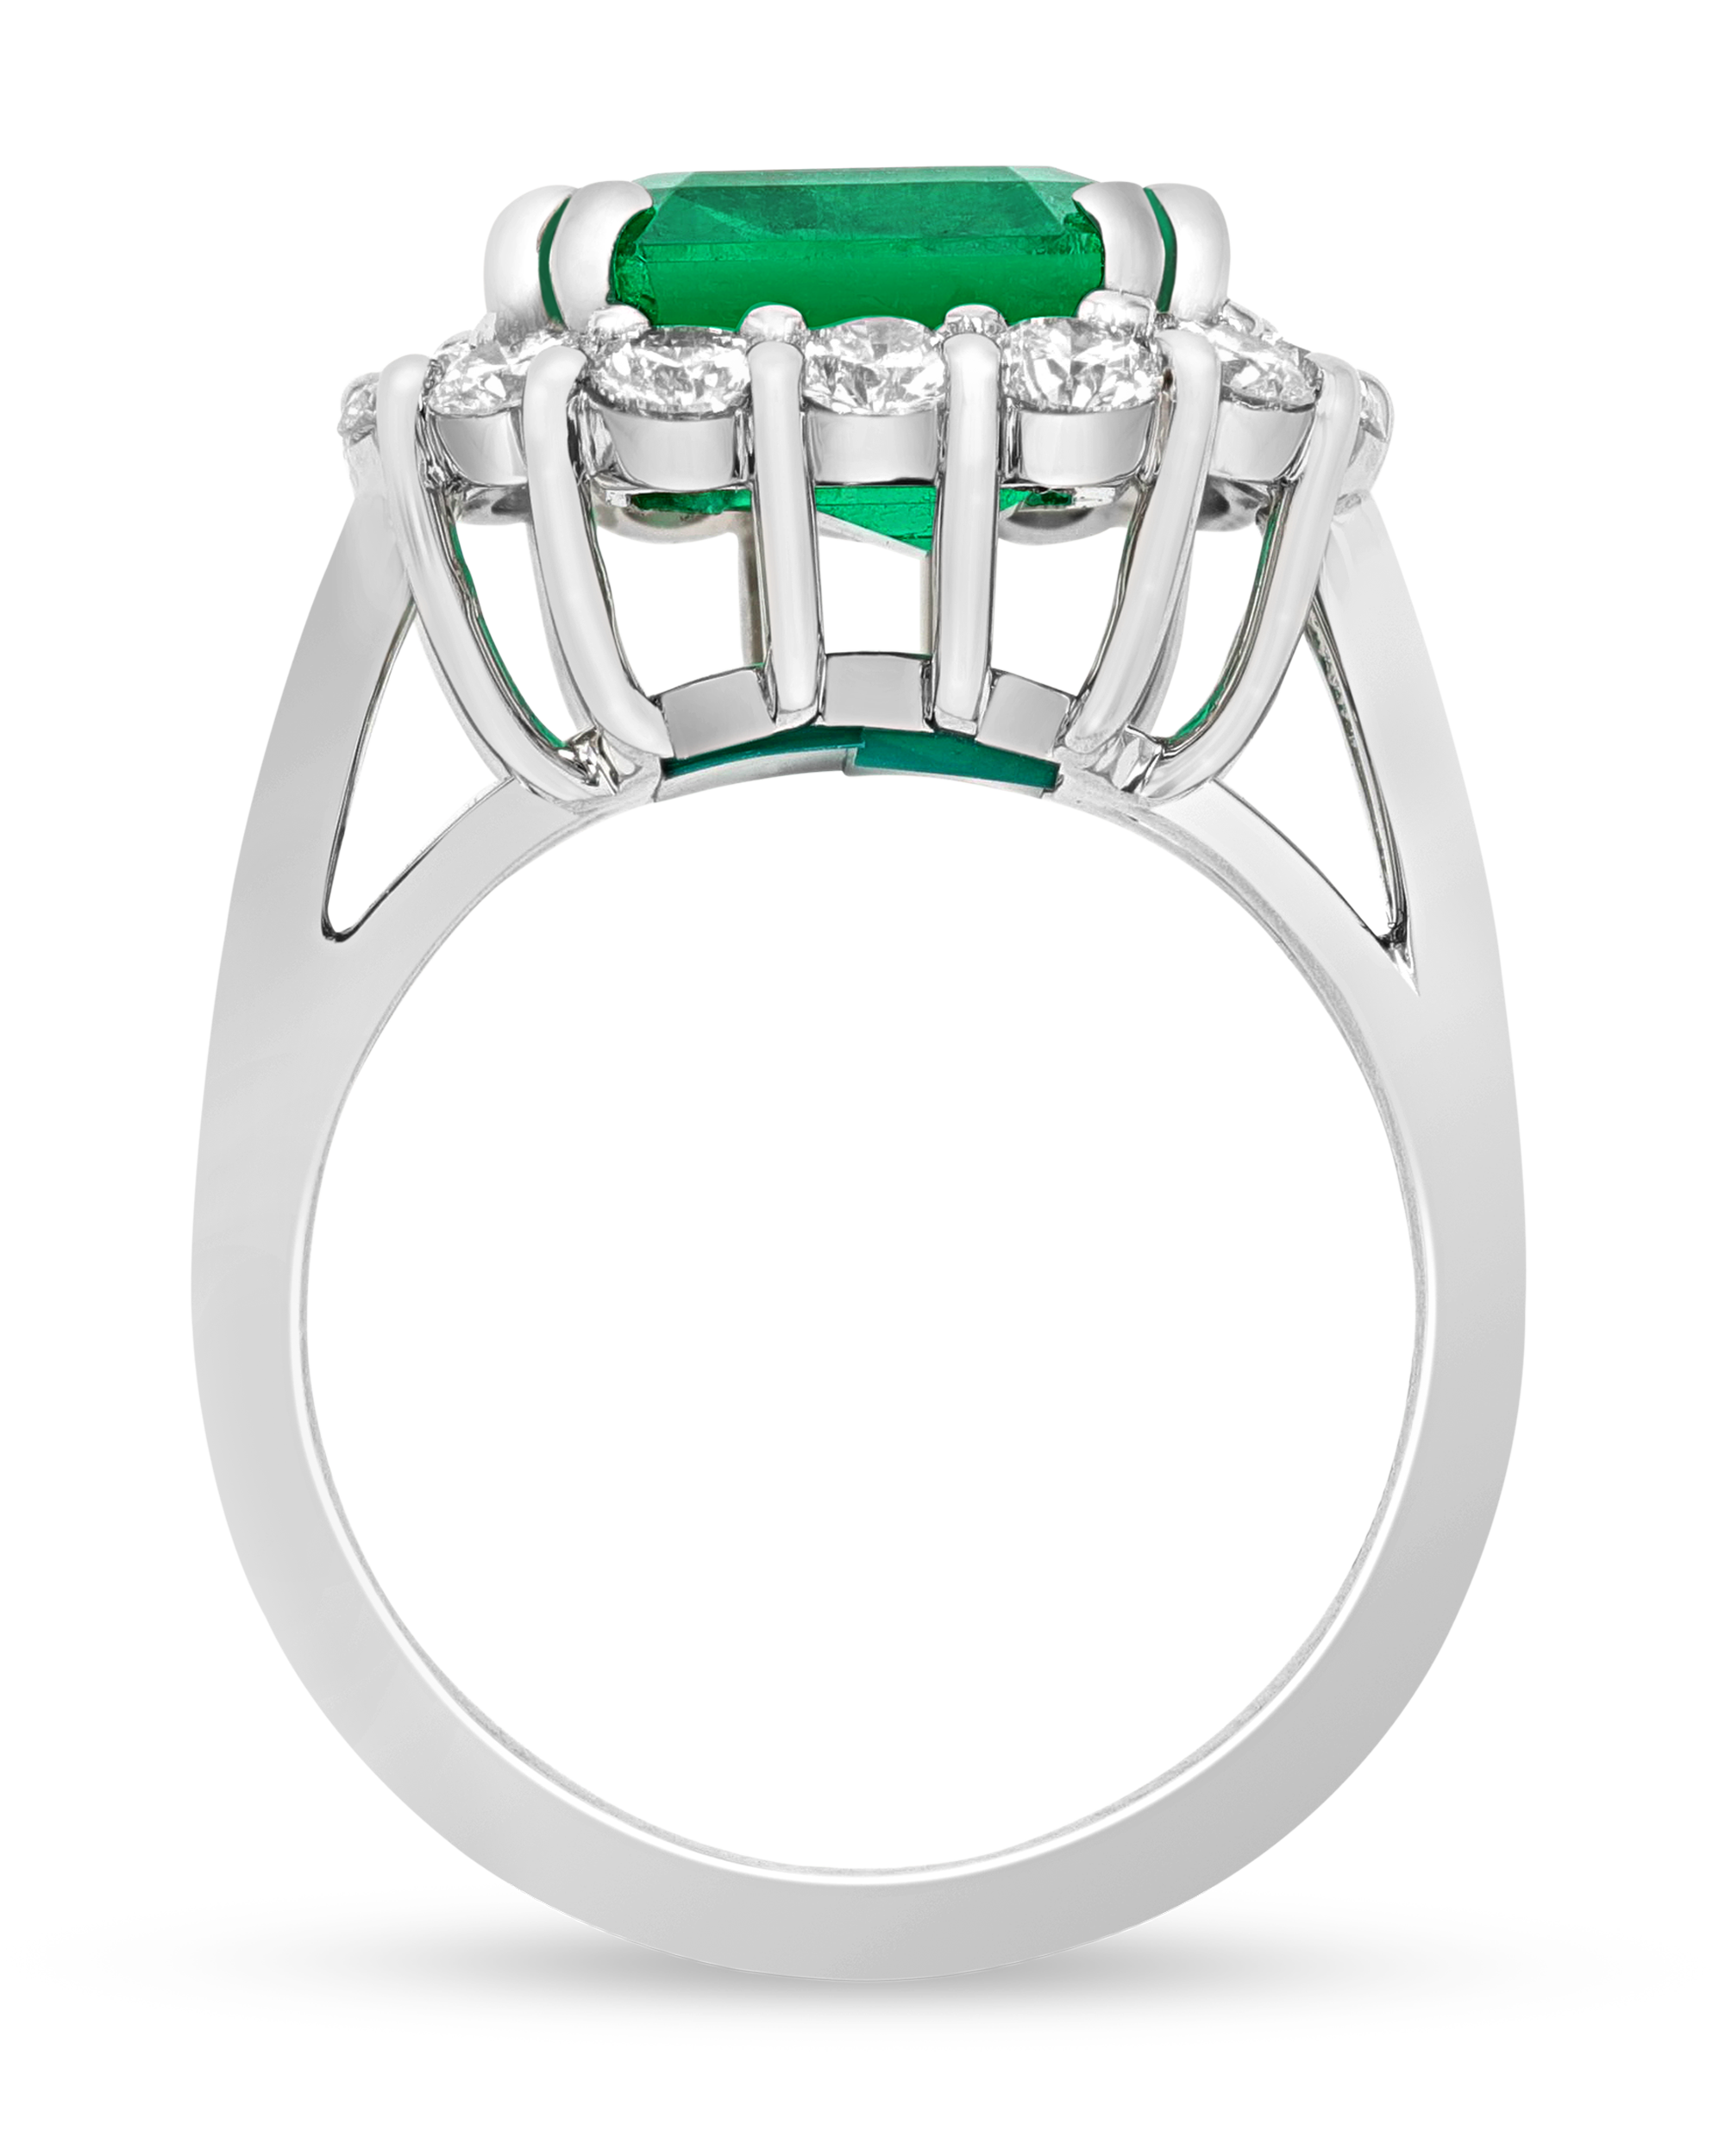 Colombian Emerald Ring, 5.11 Carats